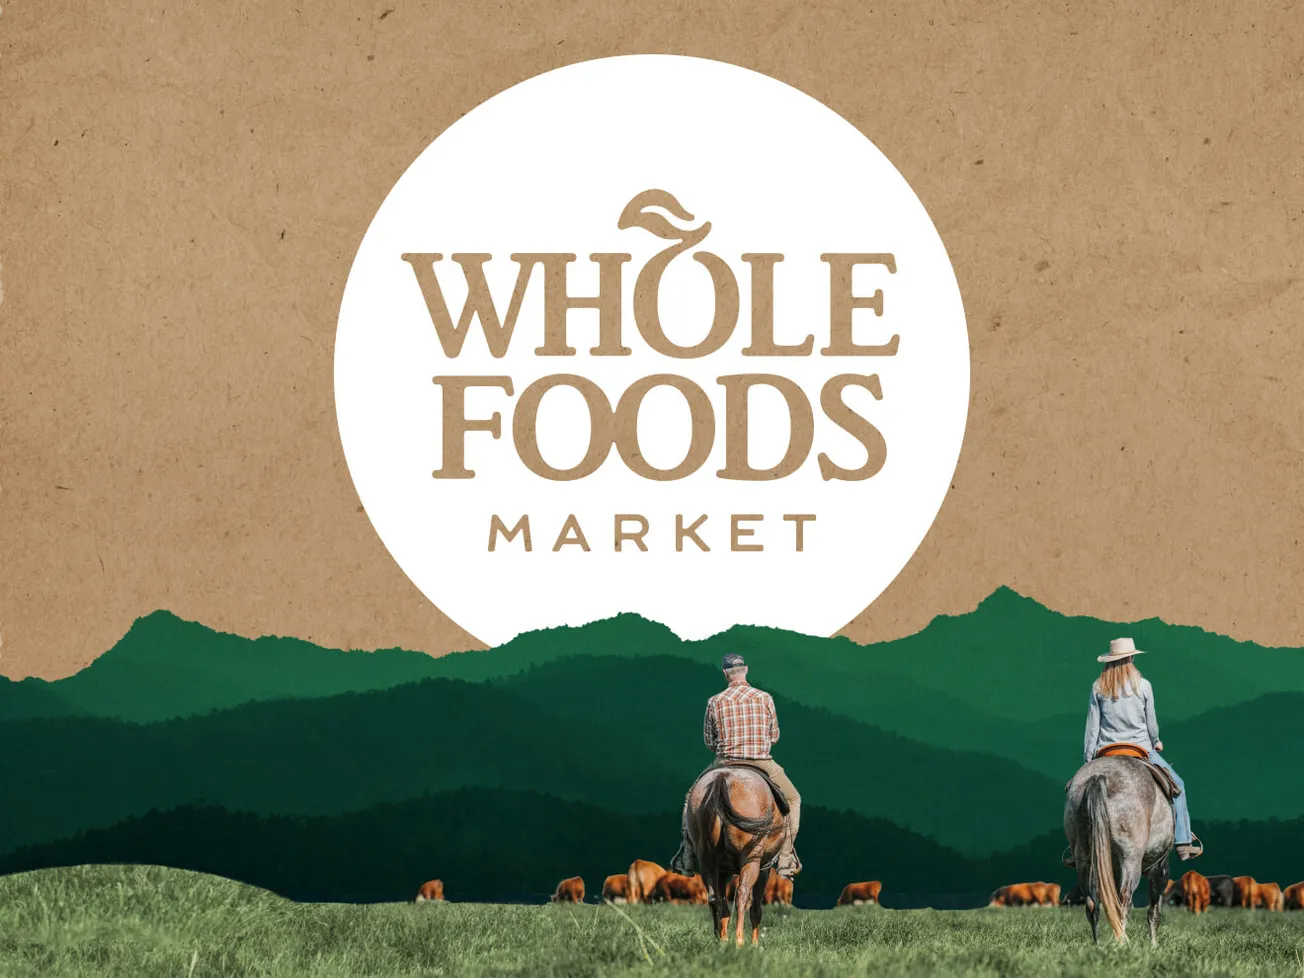 Whole Foods impact report highlights sustainability and sourcing initiatives